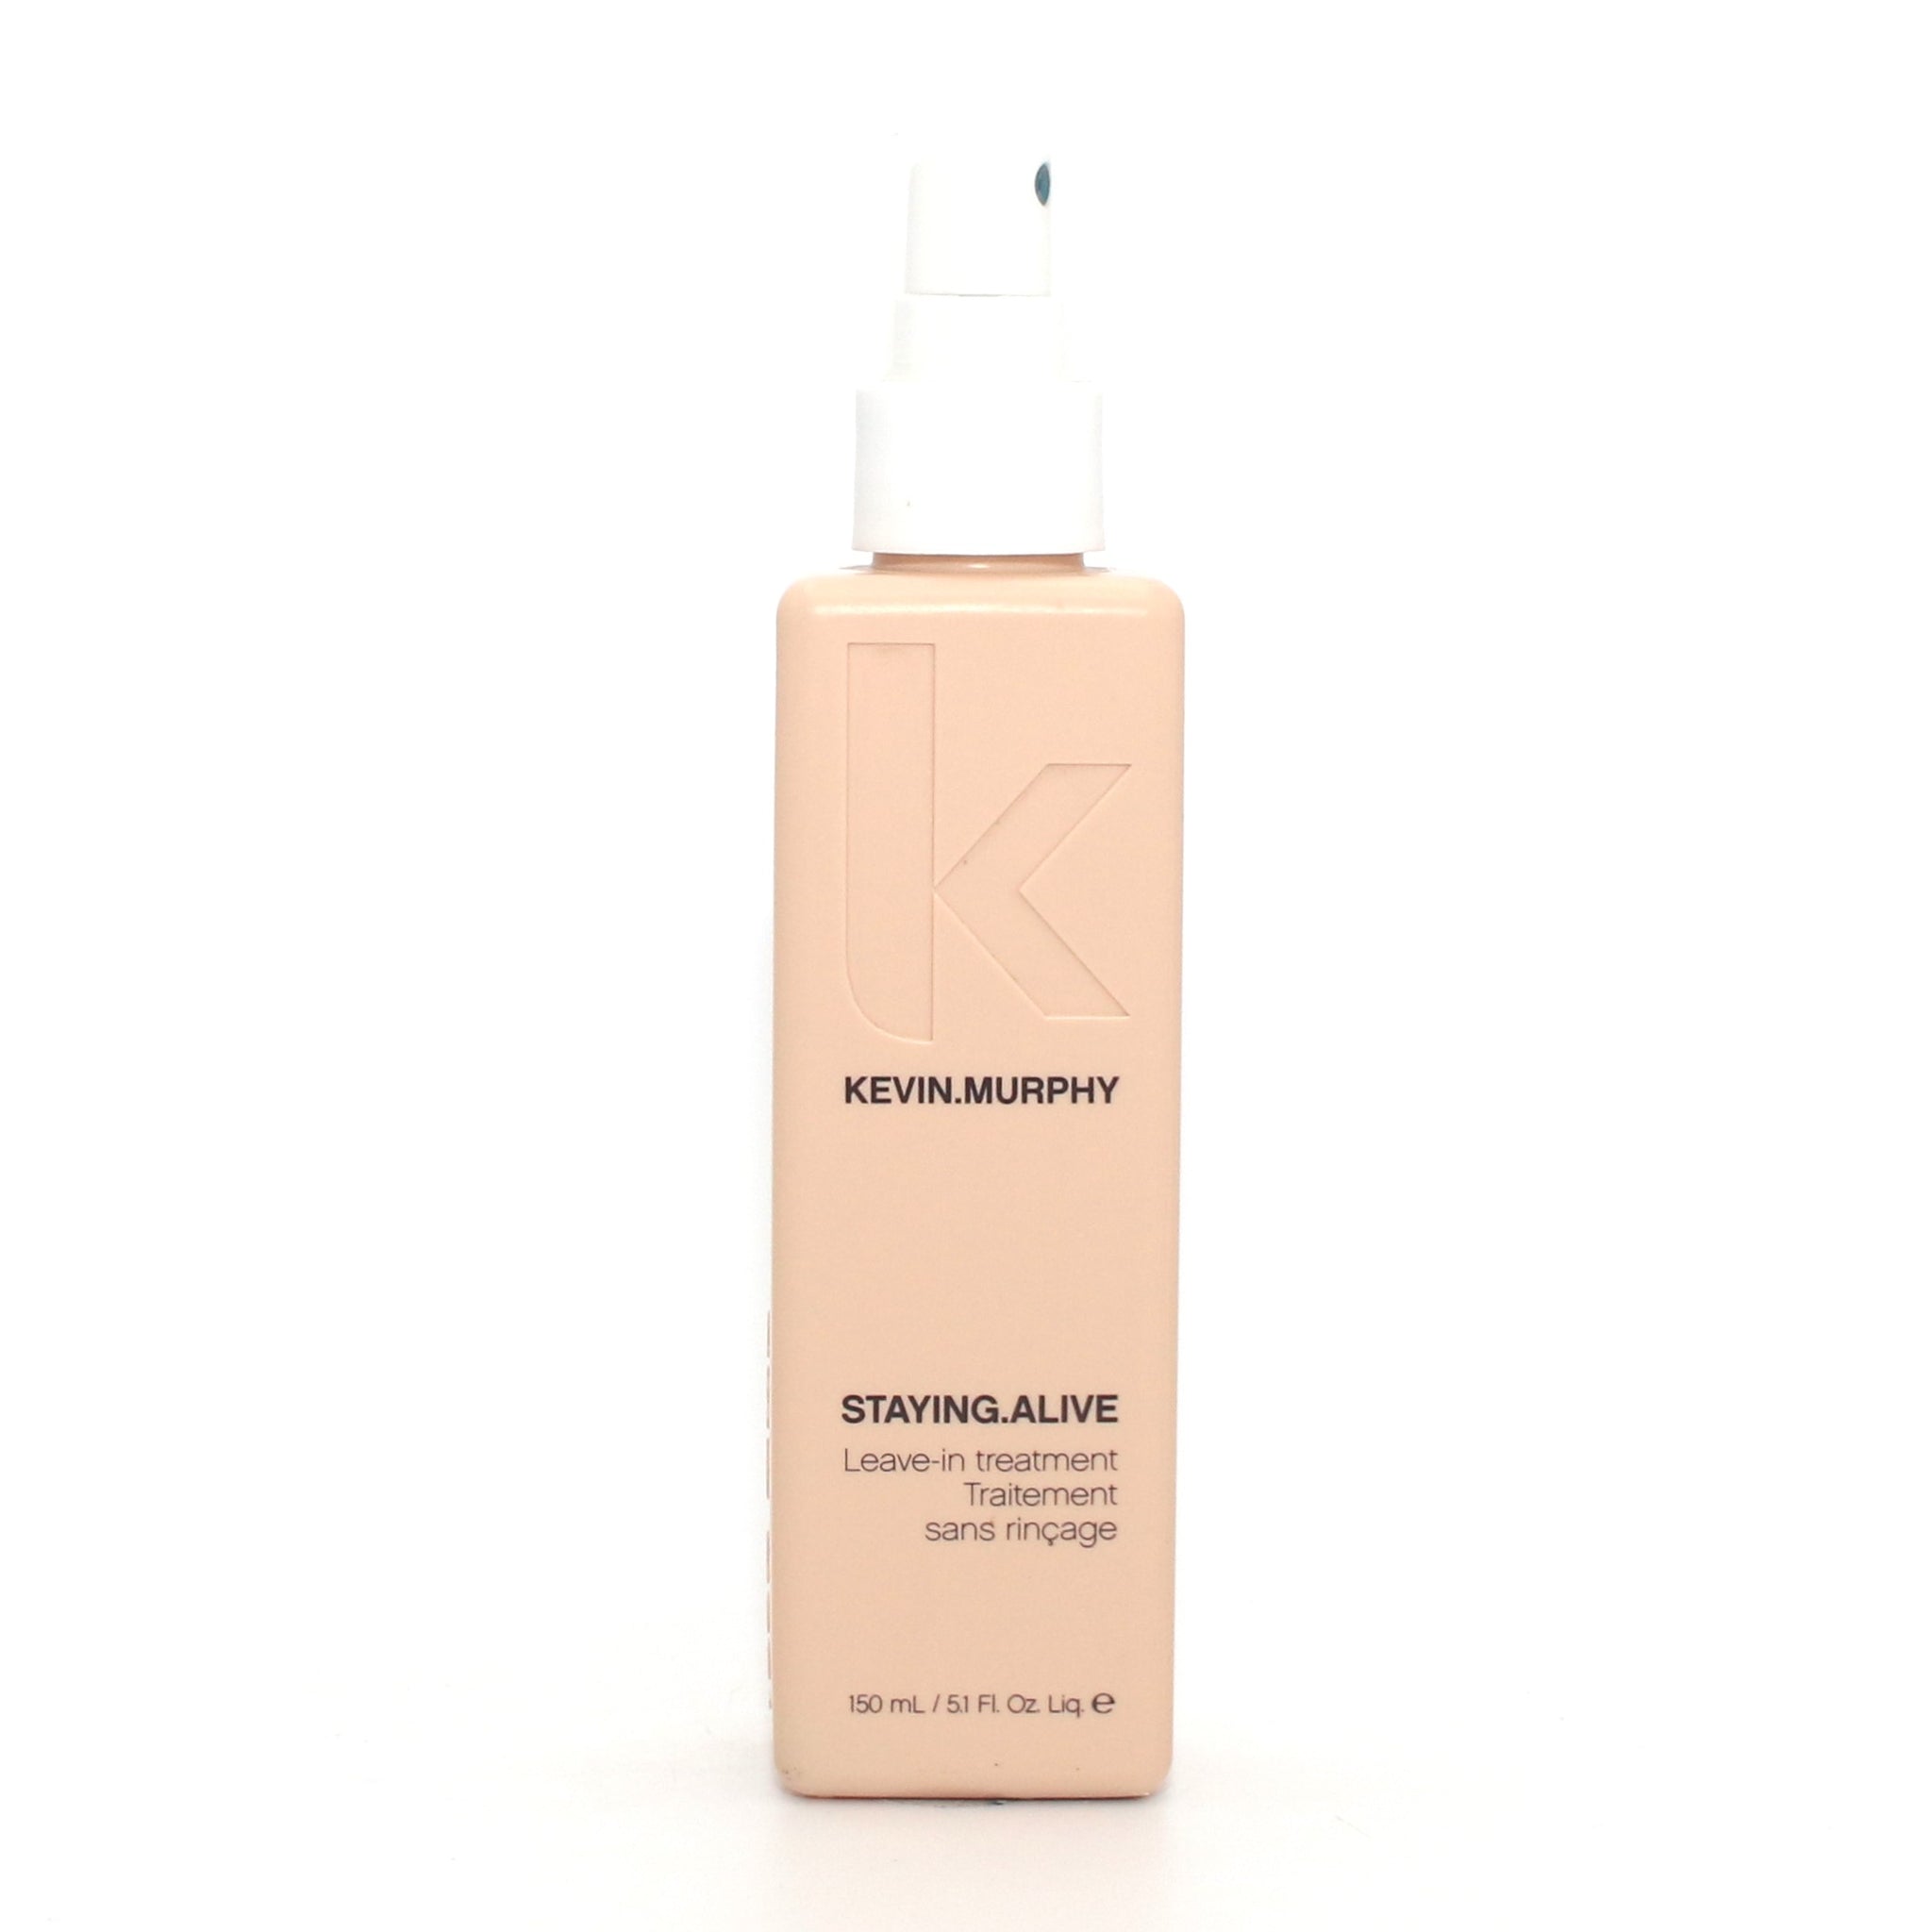 Kevin Murphy Staying Alive Leave in Treatment 5.1 oz